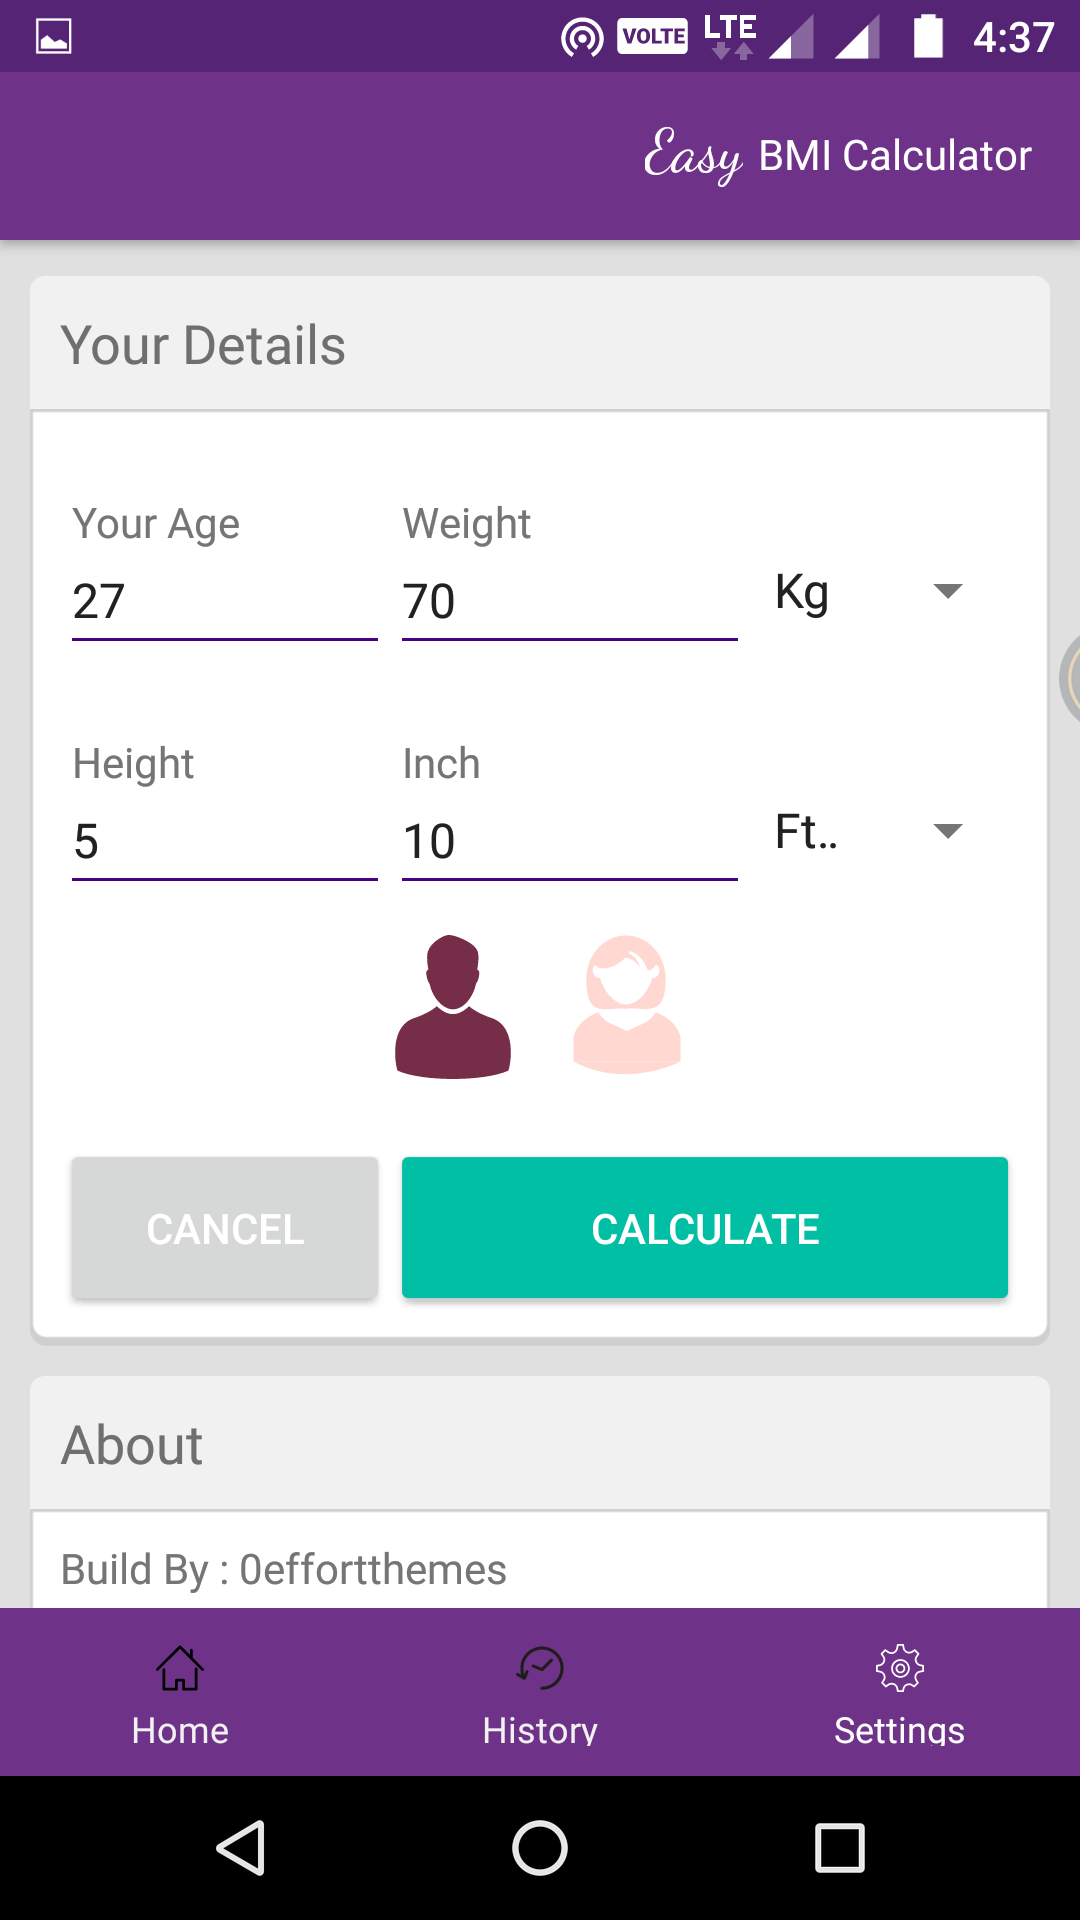 Easy BMI Calculator | Android Studio Mobile Application by 0effortthemes